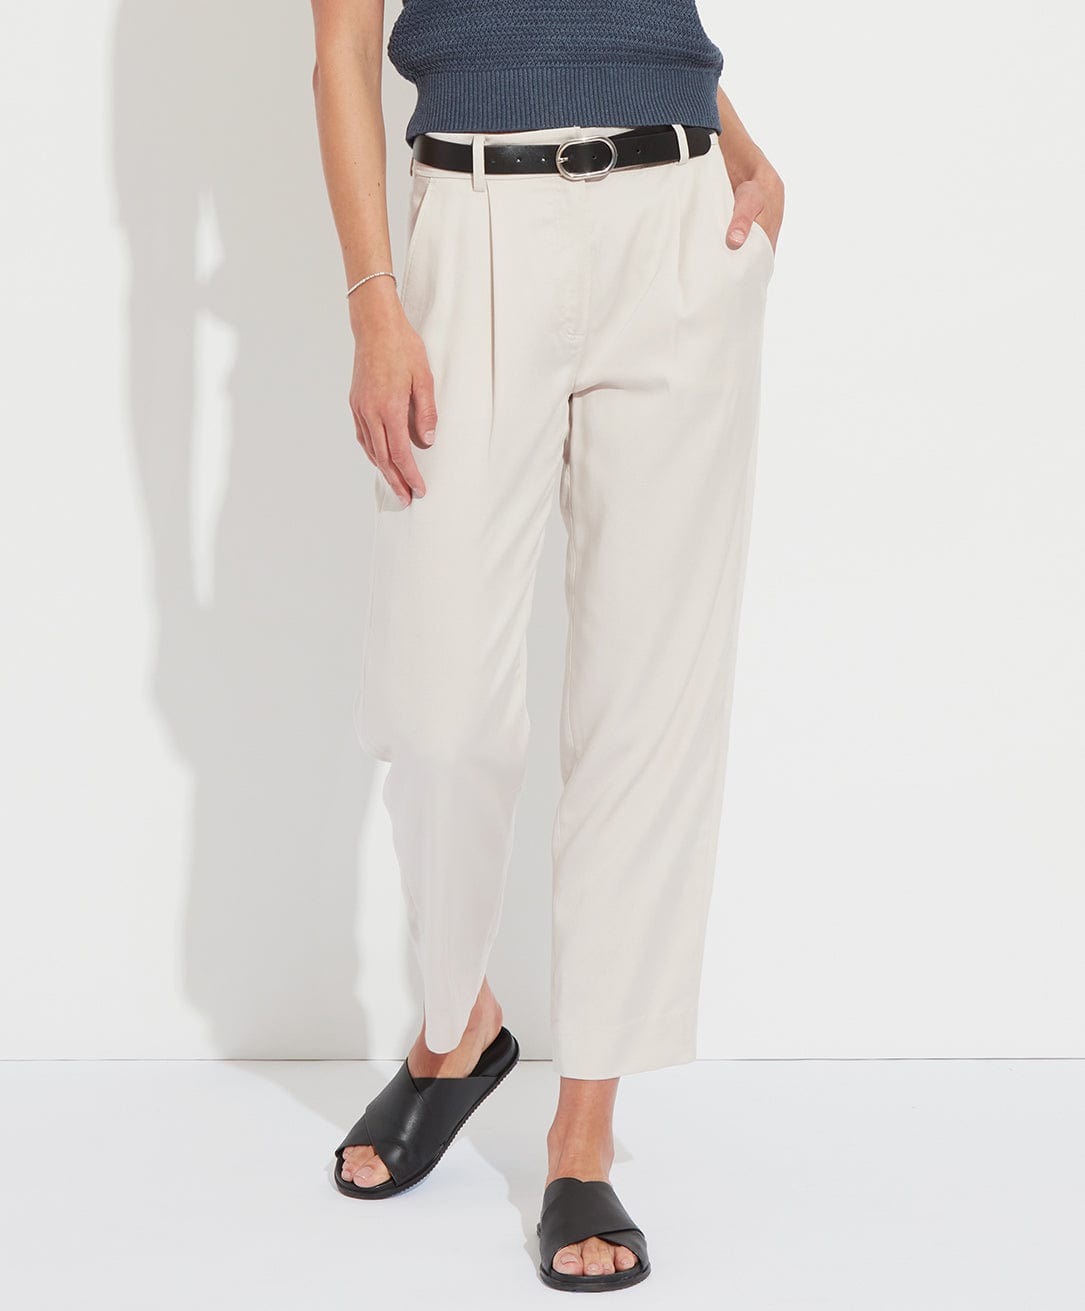 The Eco Slouchy Trouser